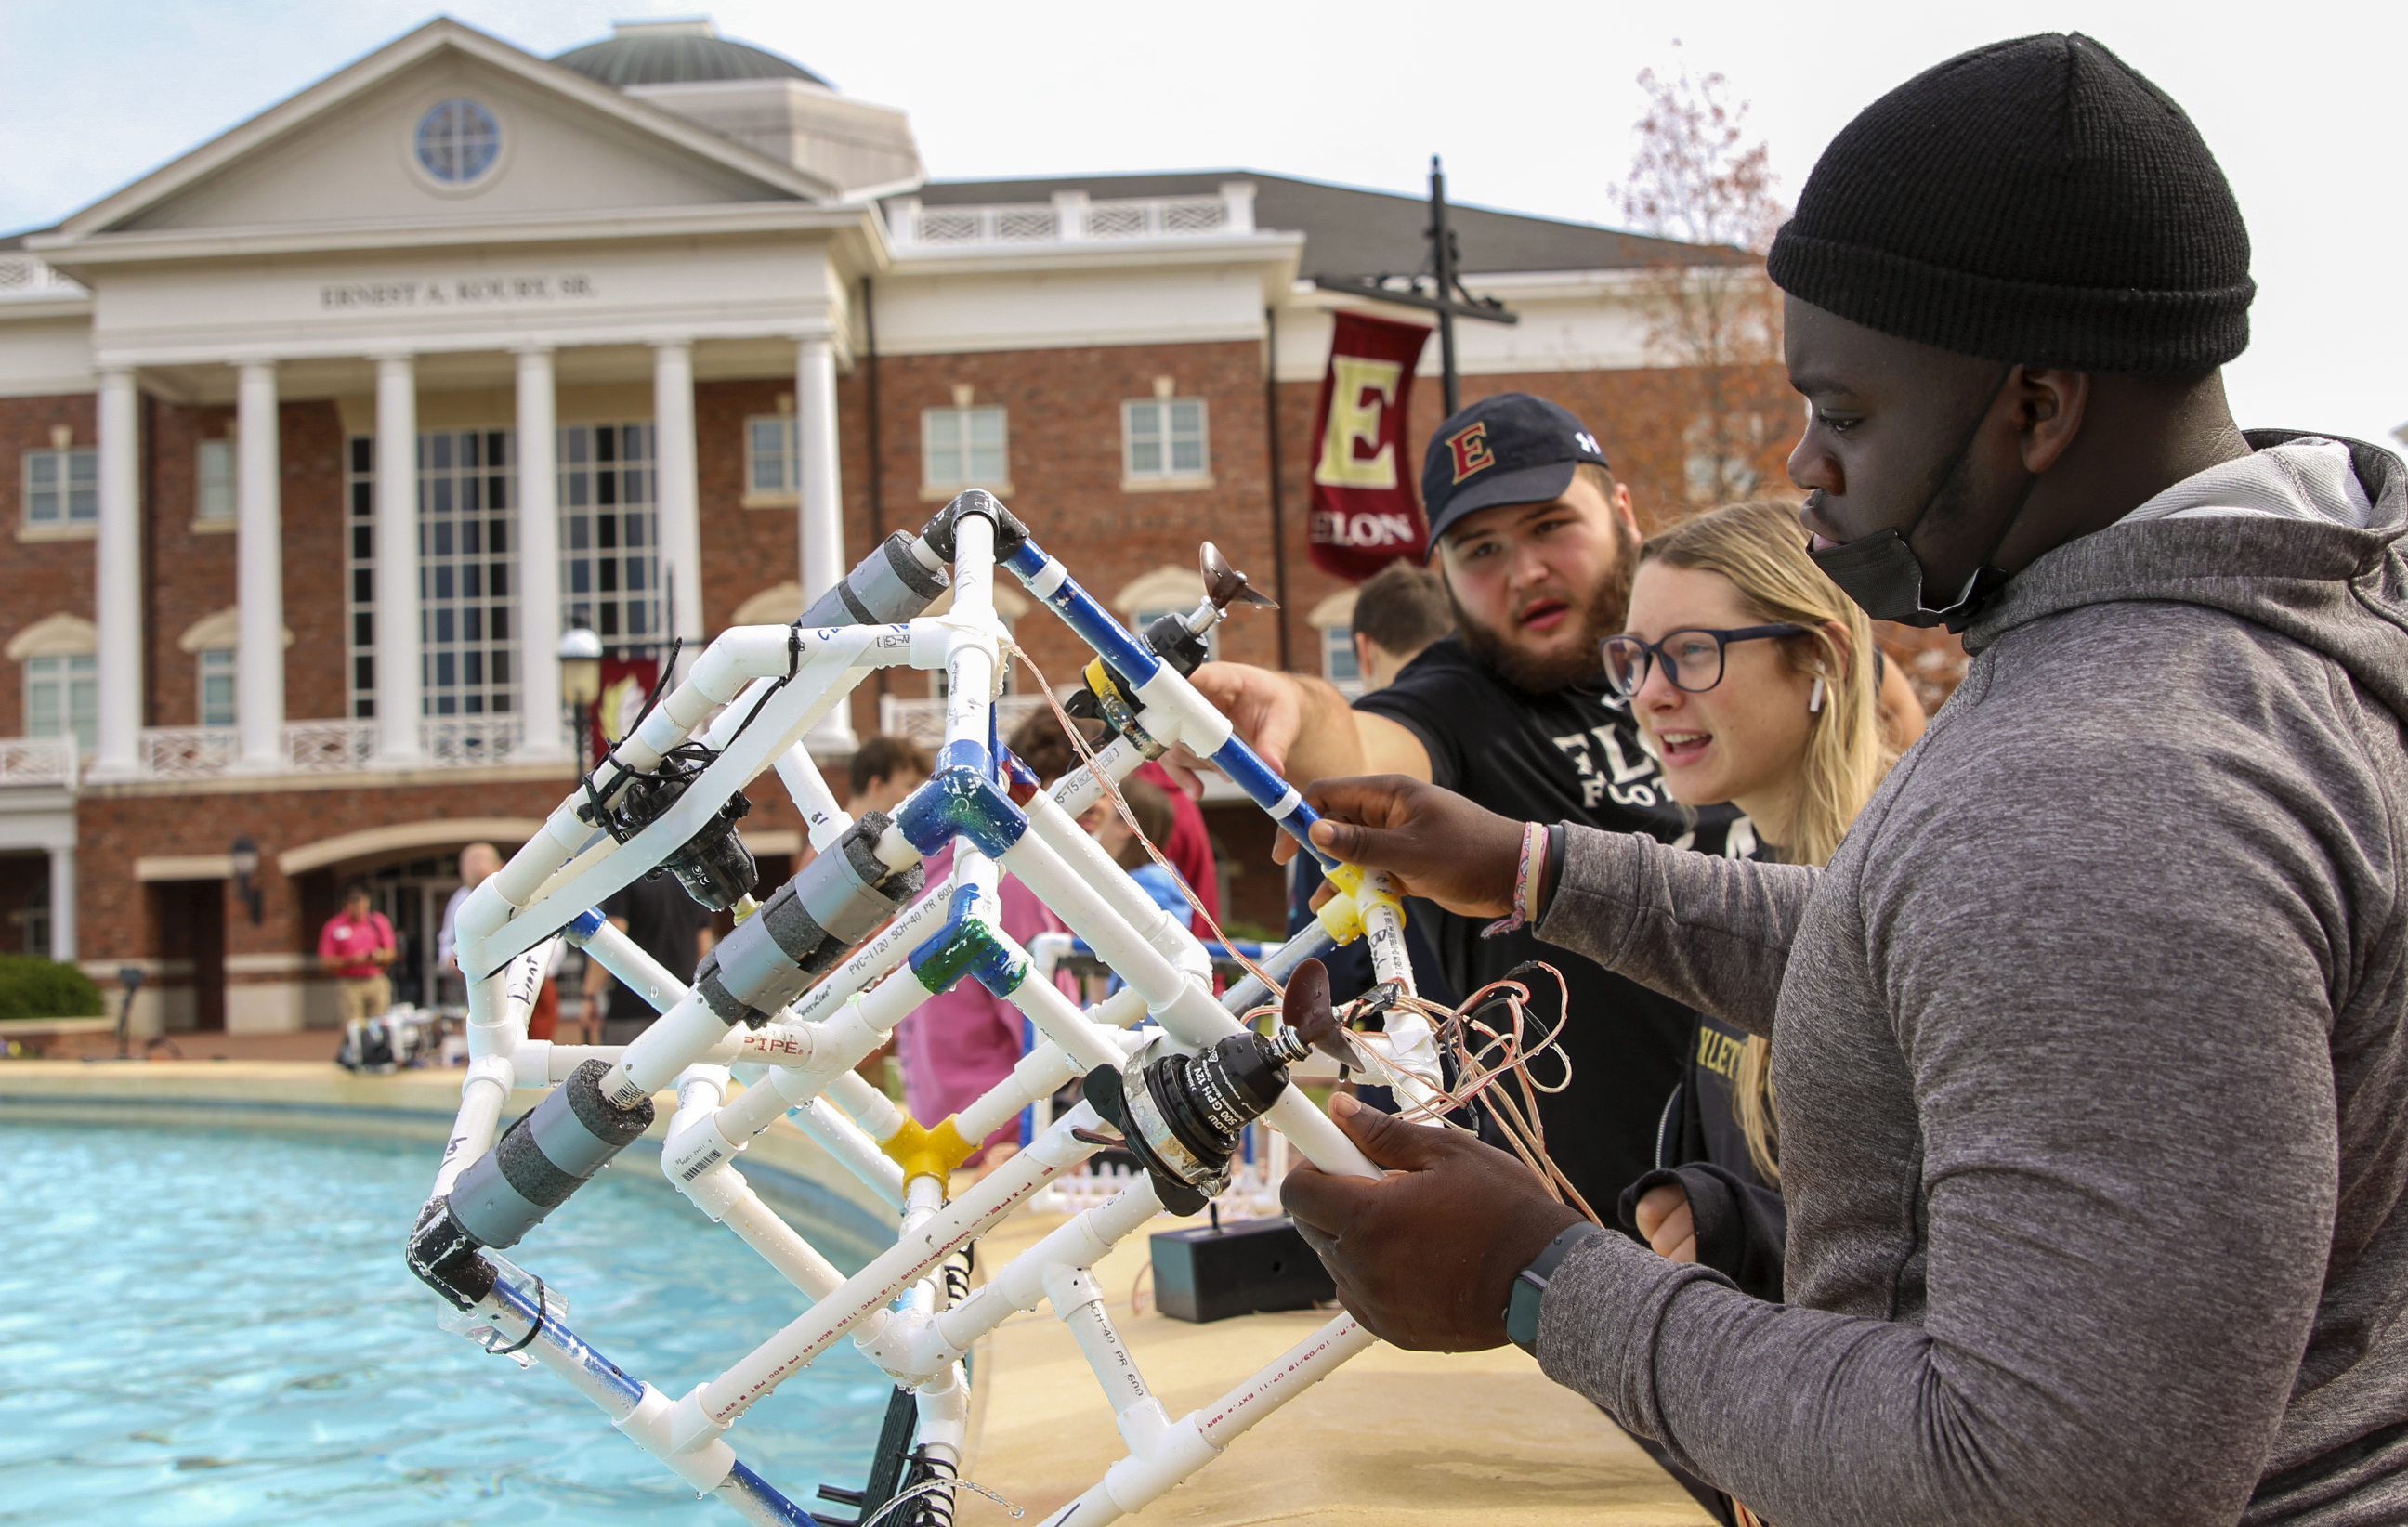 Three students examine their underwater remotely operated vehicle prototype made from PVC pipe, rake tines and pool noodles in an outdoor fountain on Elon's campus.